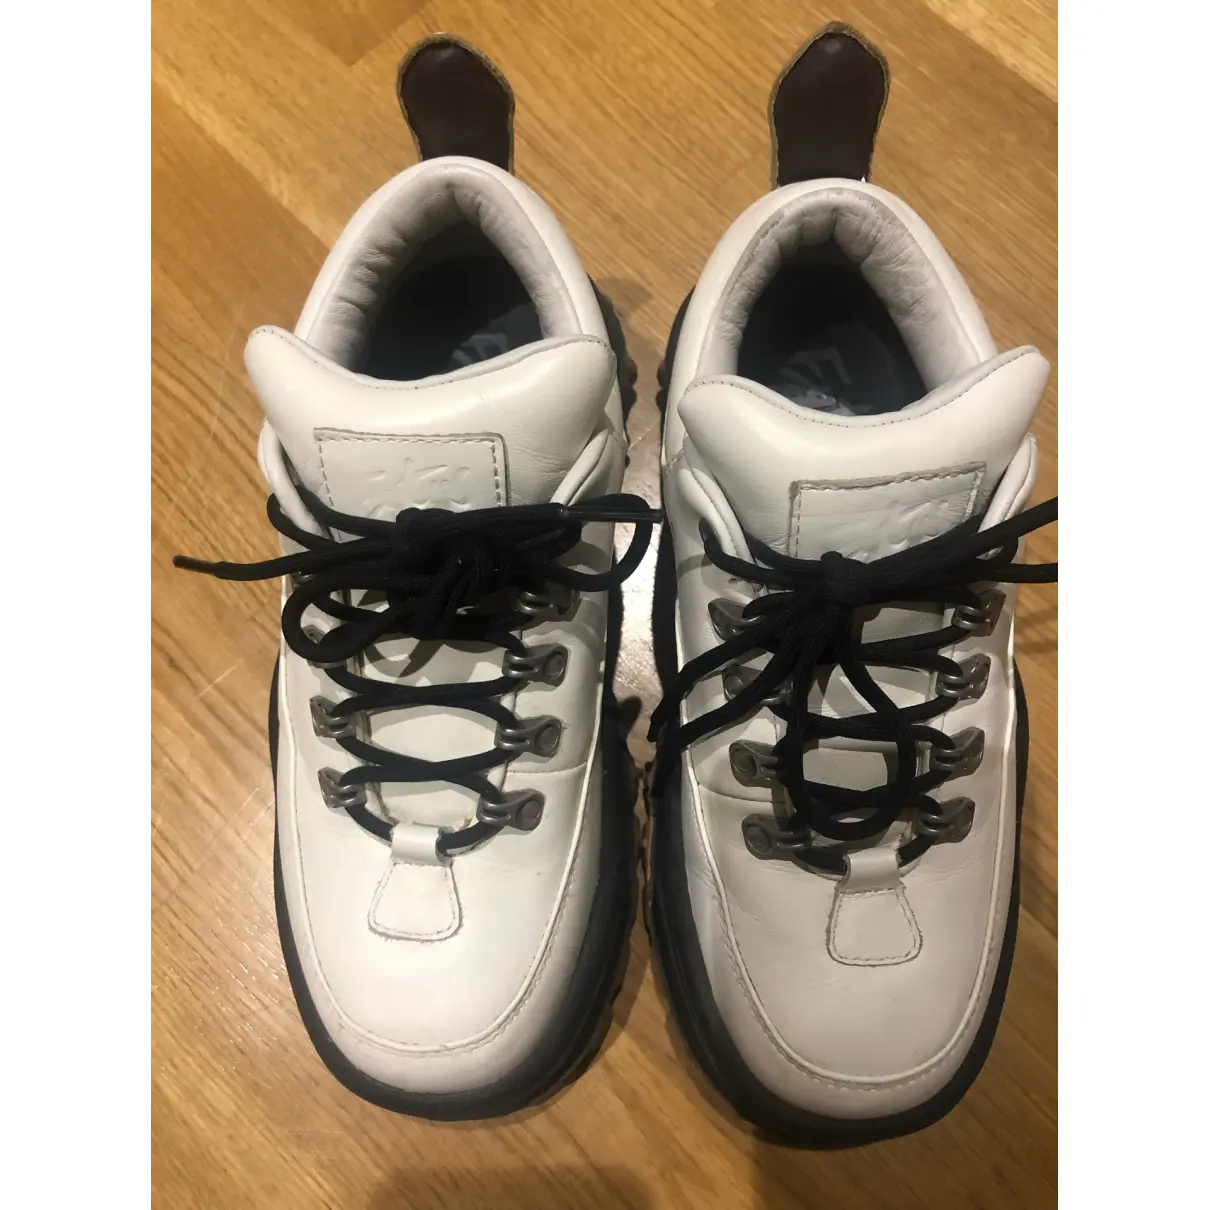 Buy Eytys Angel leather trainers online